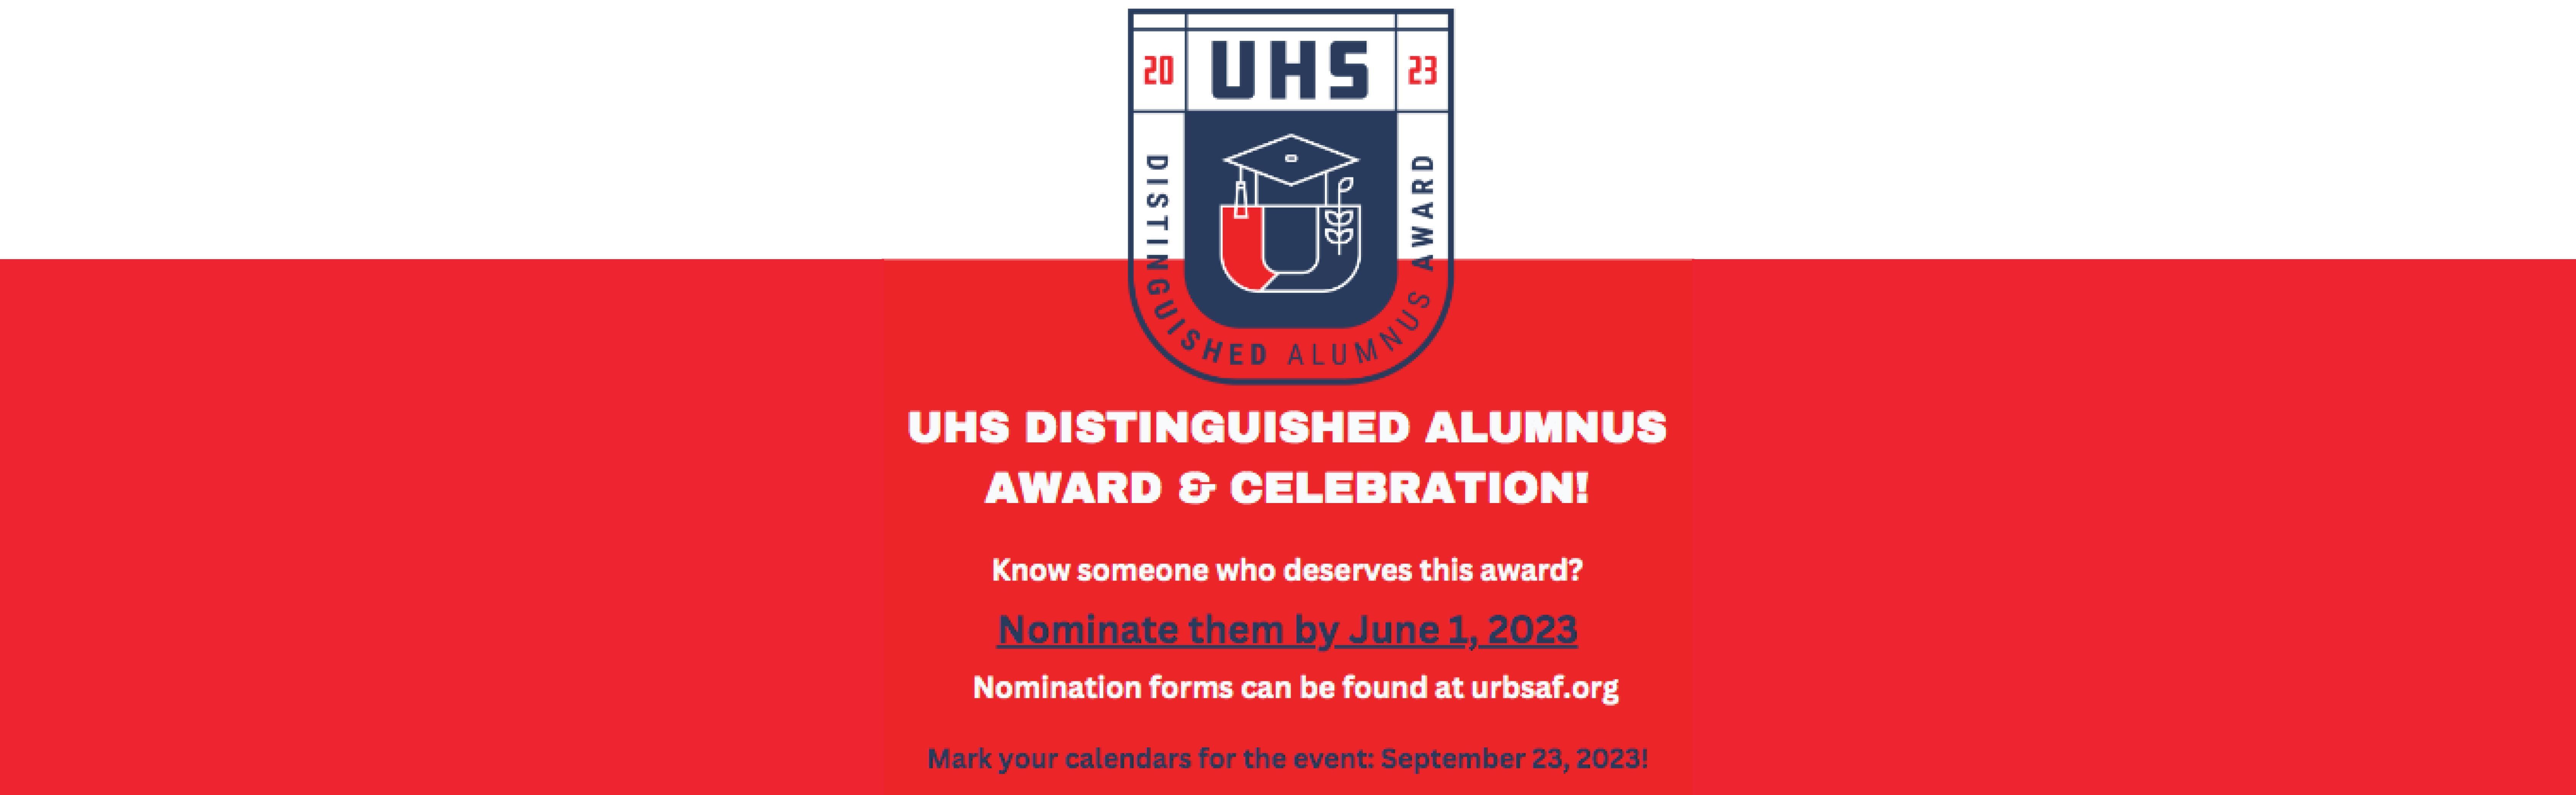 Nominations Open For UHS Distinguished Alumnus Award